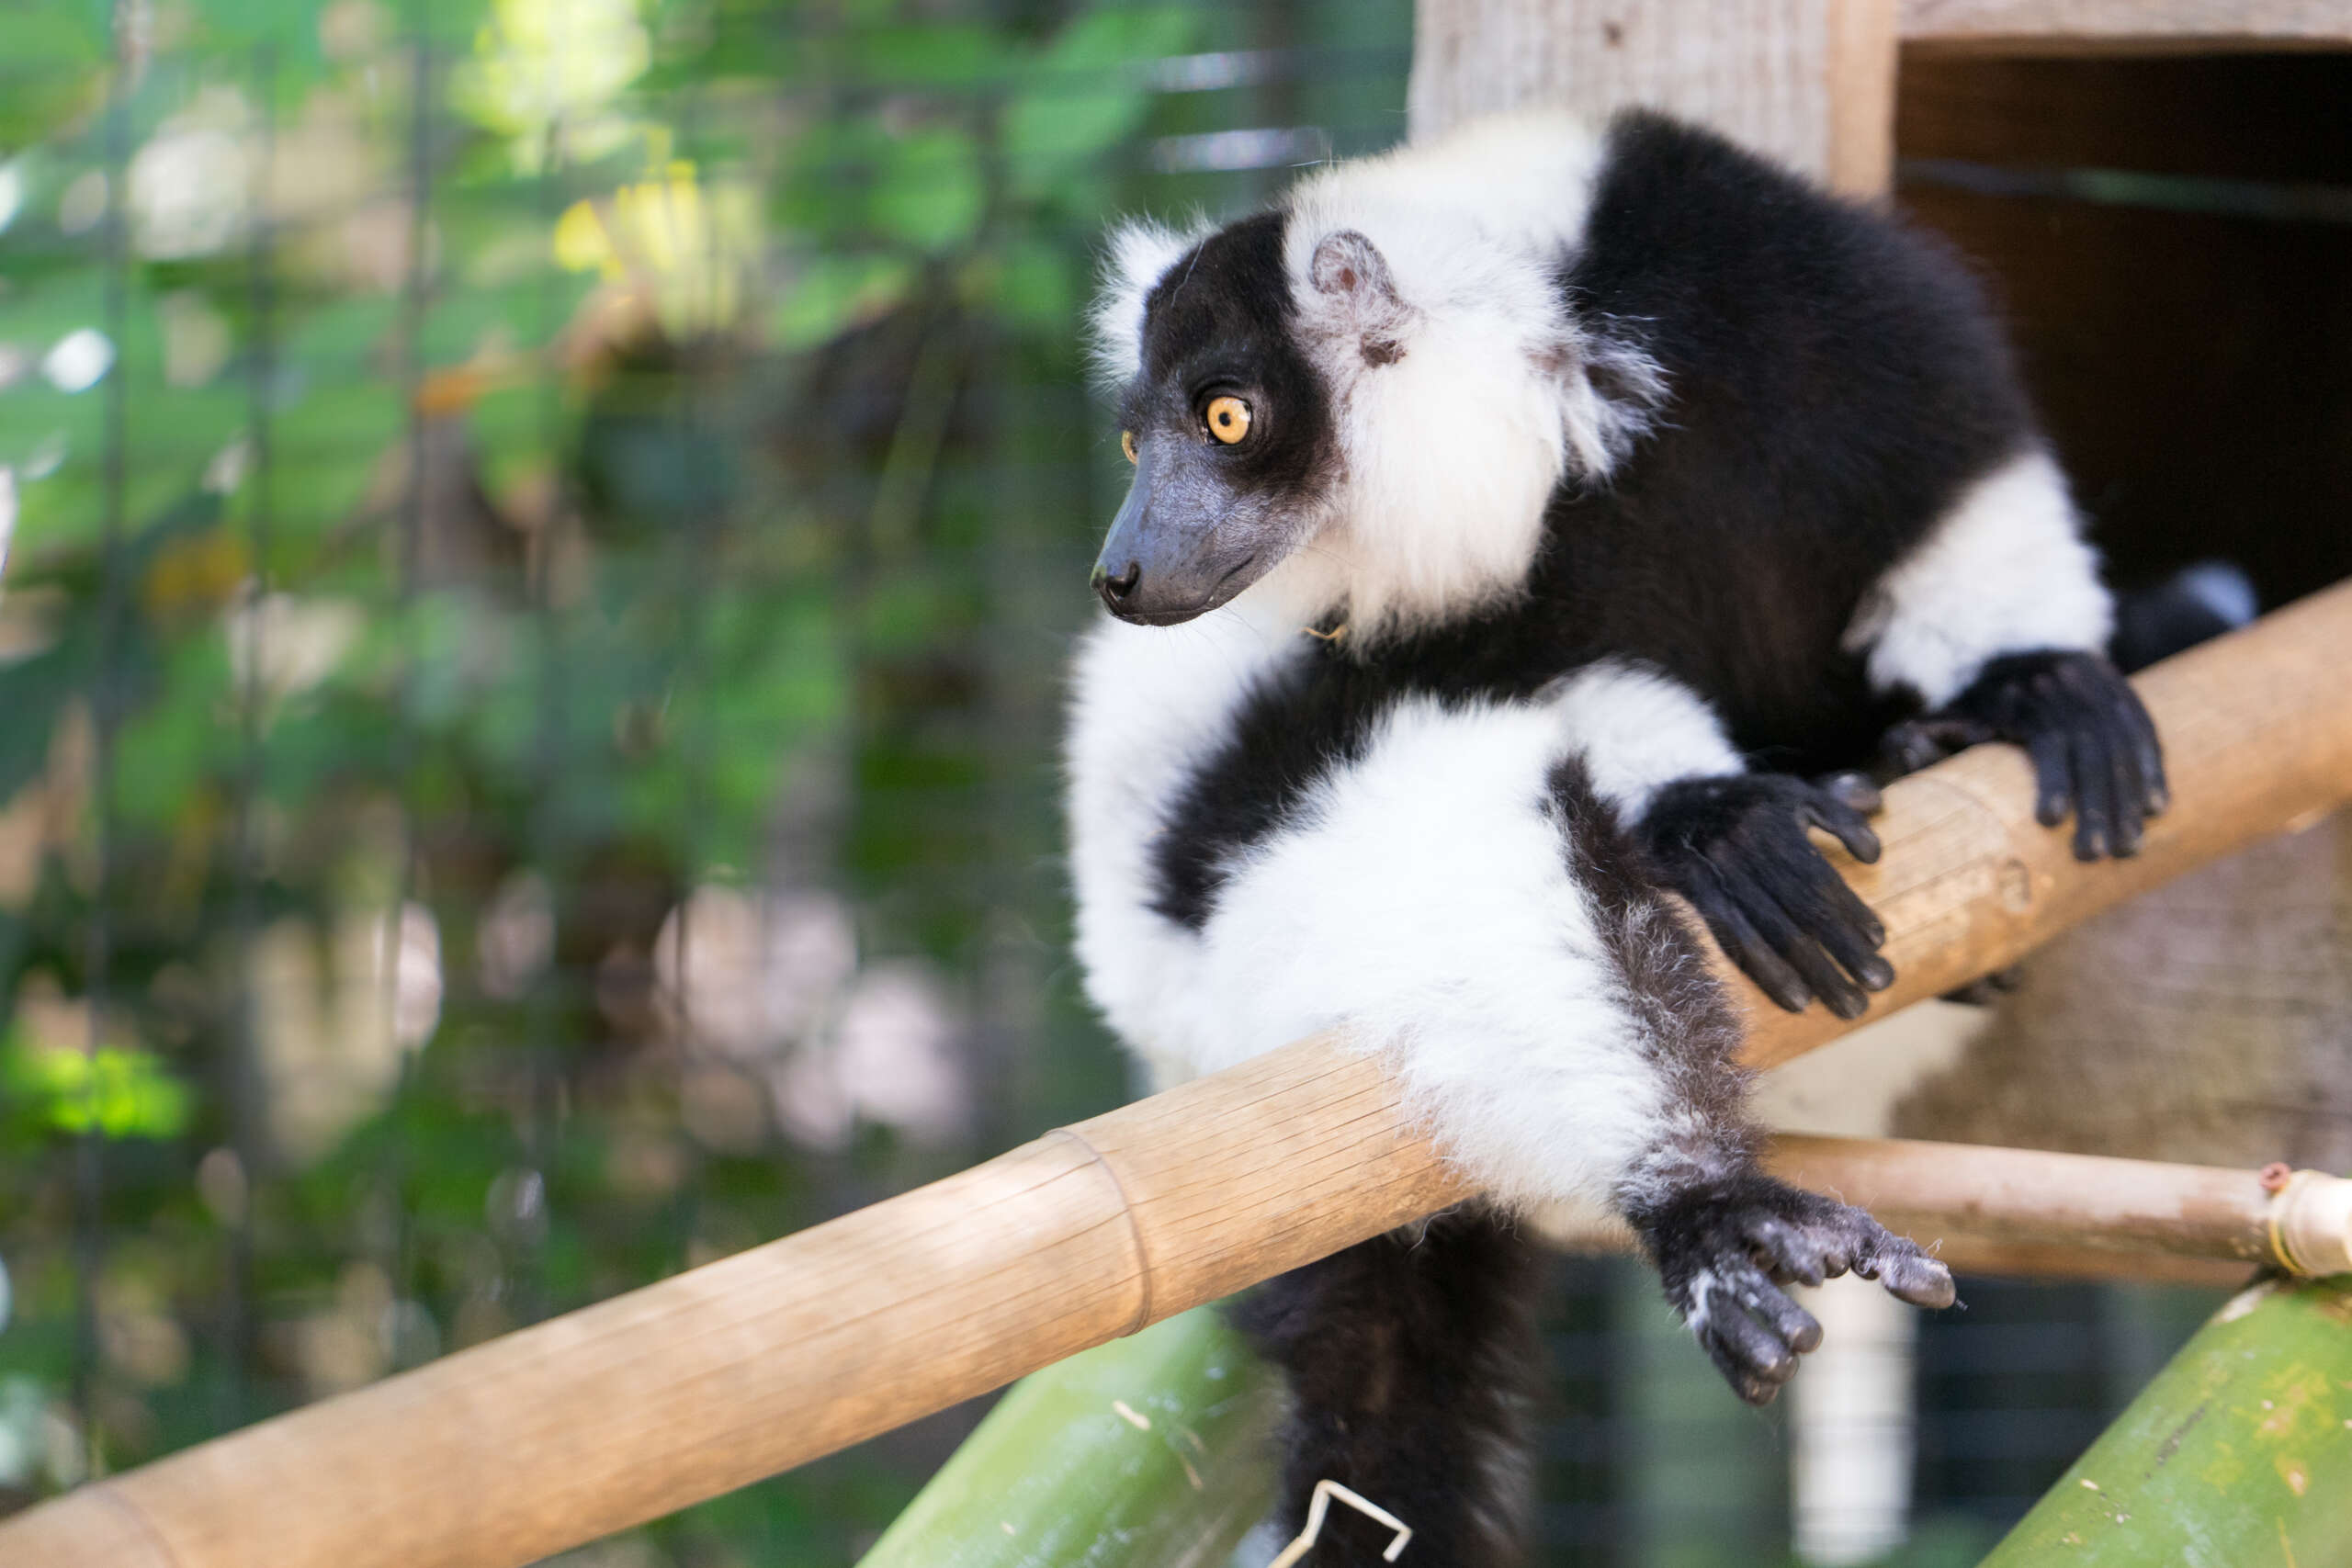 A black and white ruffed lemur at Happy Hollow